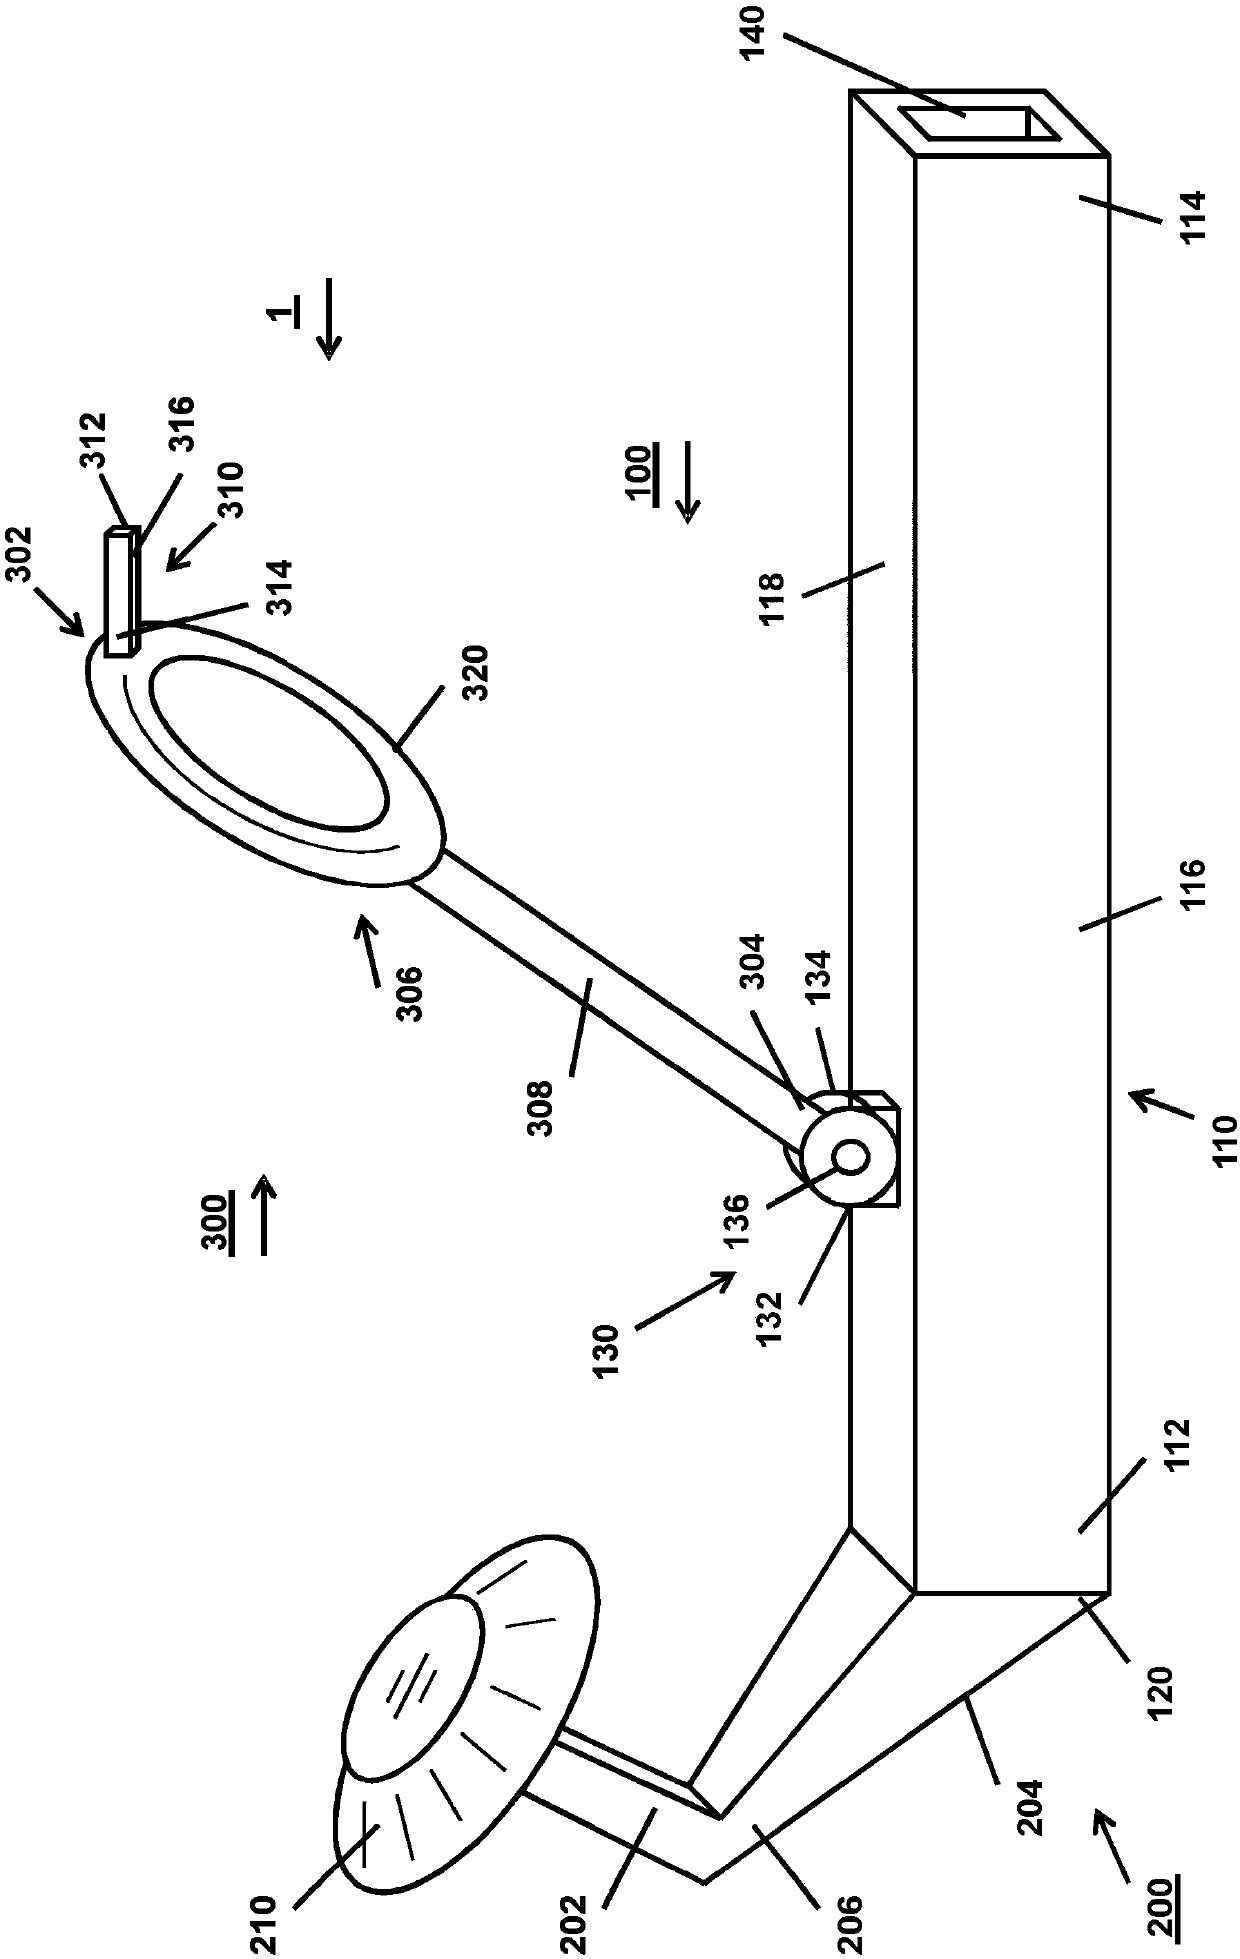 Tire installation/removal tool assembly and installation support tool